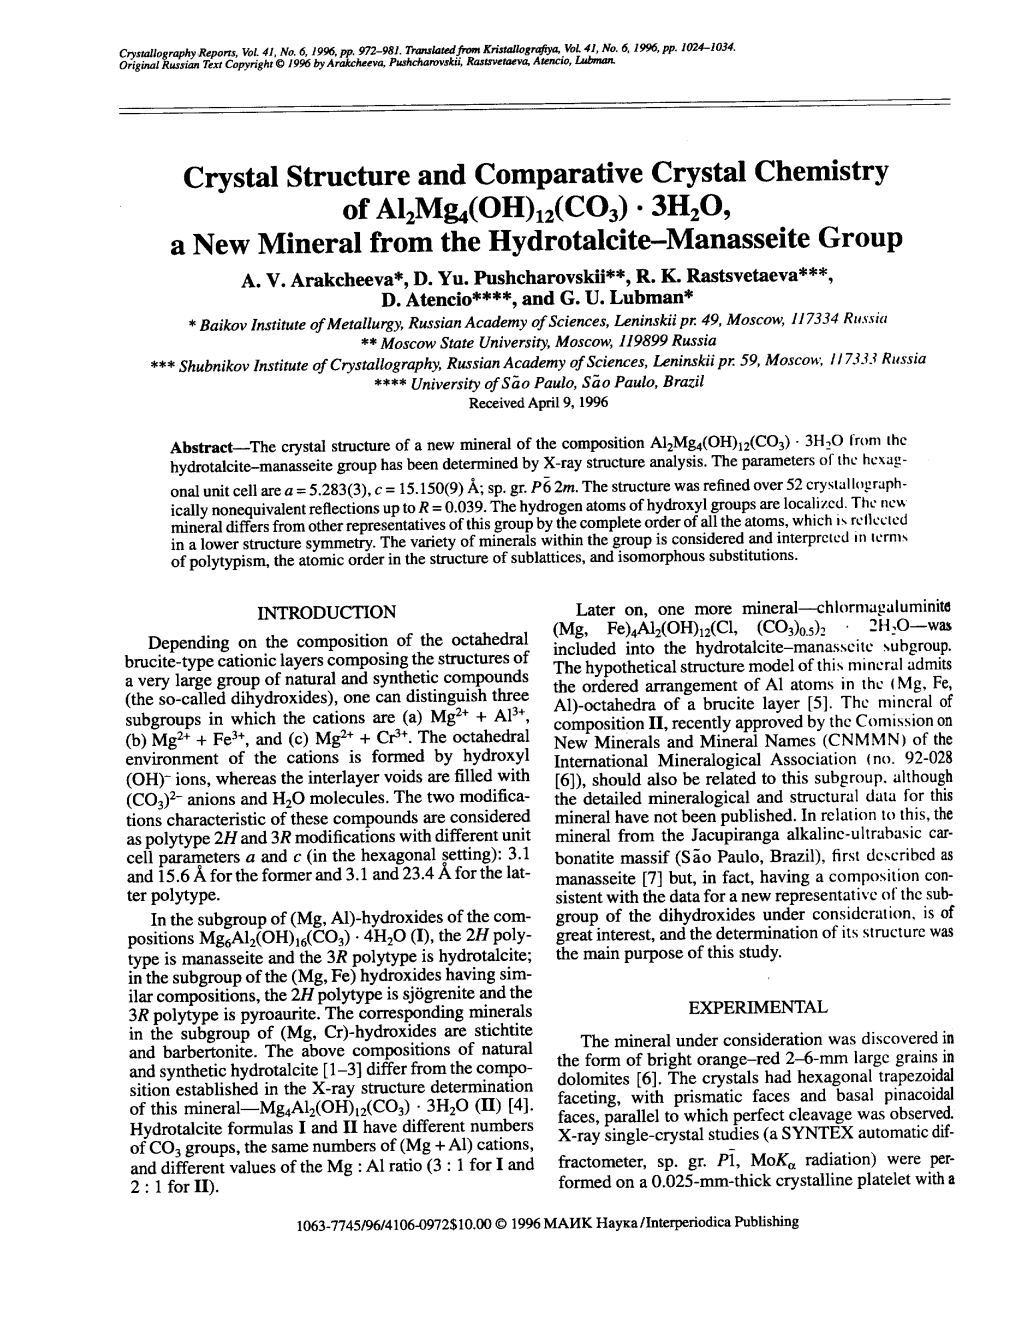 Crystal Structure and Comparative Crystal Chemistry of AI2M~(OH)12(C03) · 3H20, a New Mineral from the Hydrotalcite-Manasseite Group A